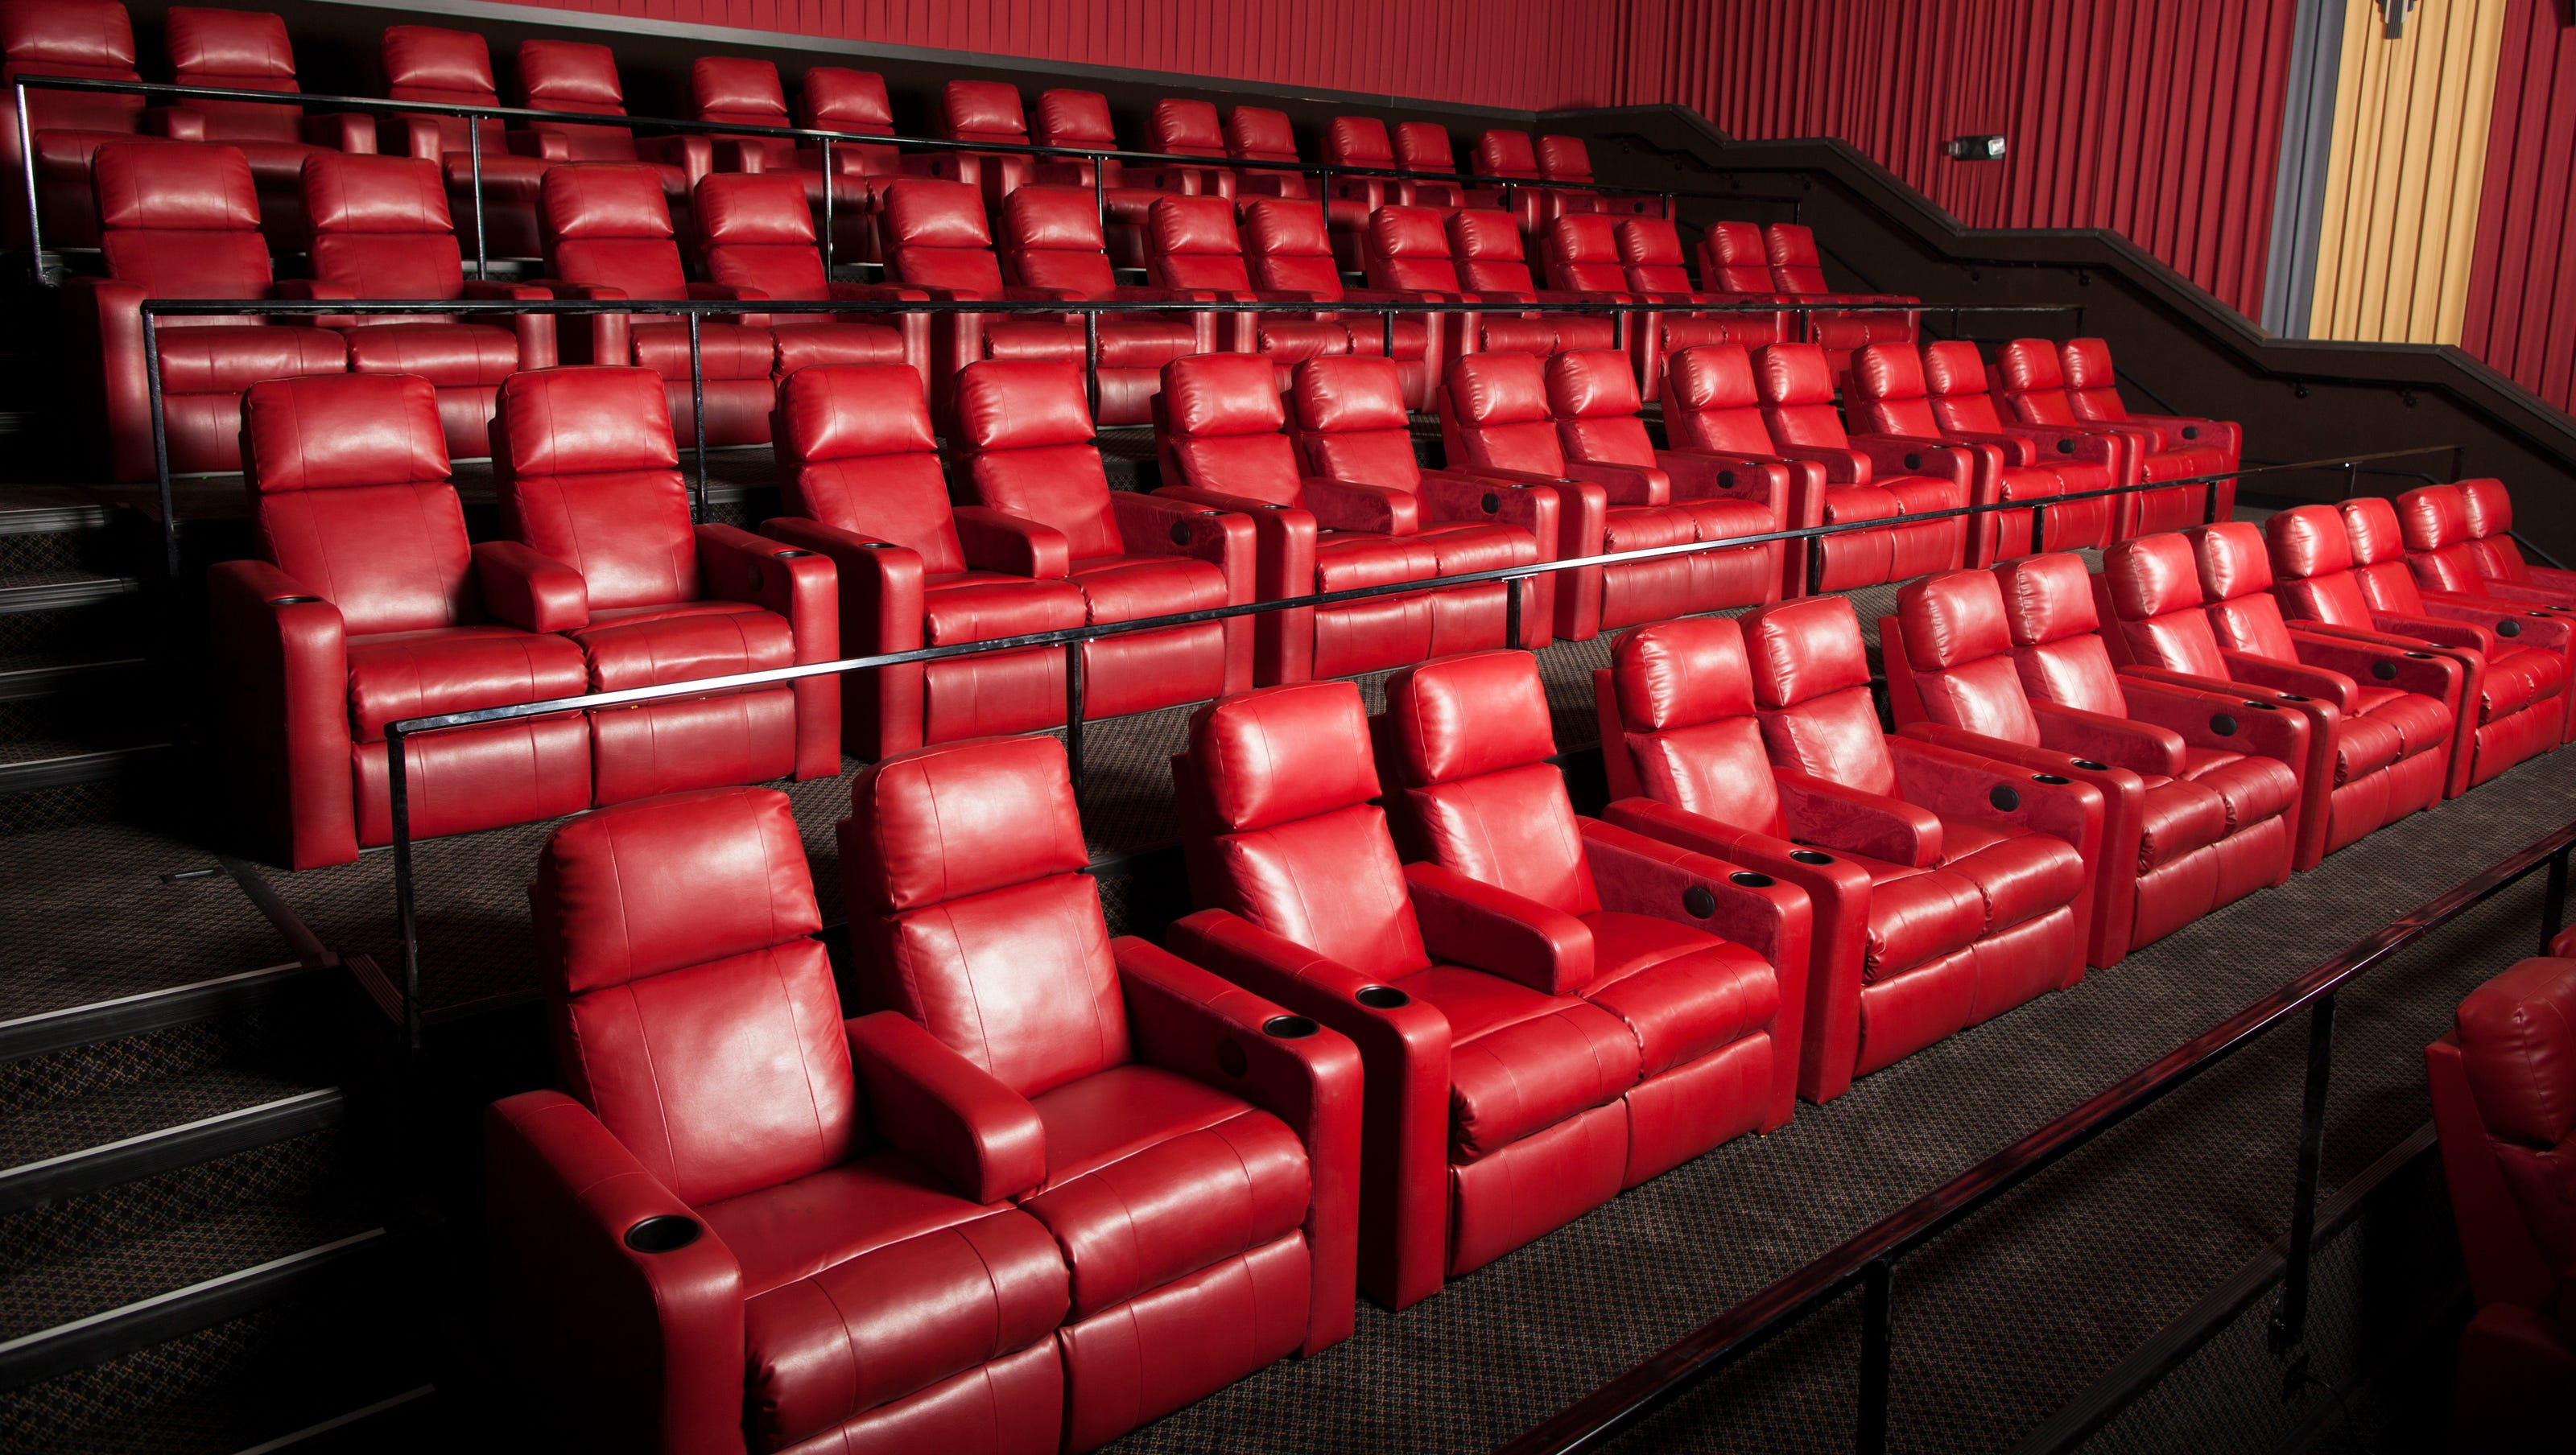 Bay Park Cinema to convert to all DreamLounger recliners by September